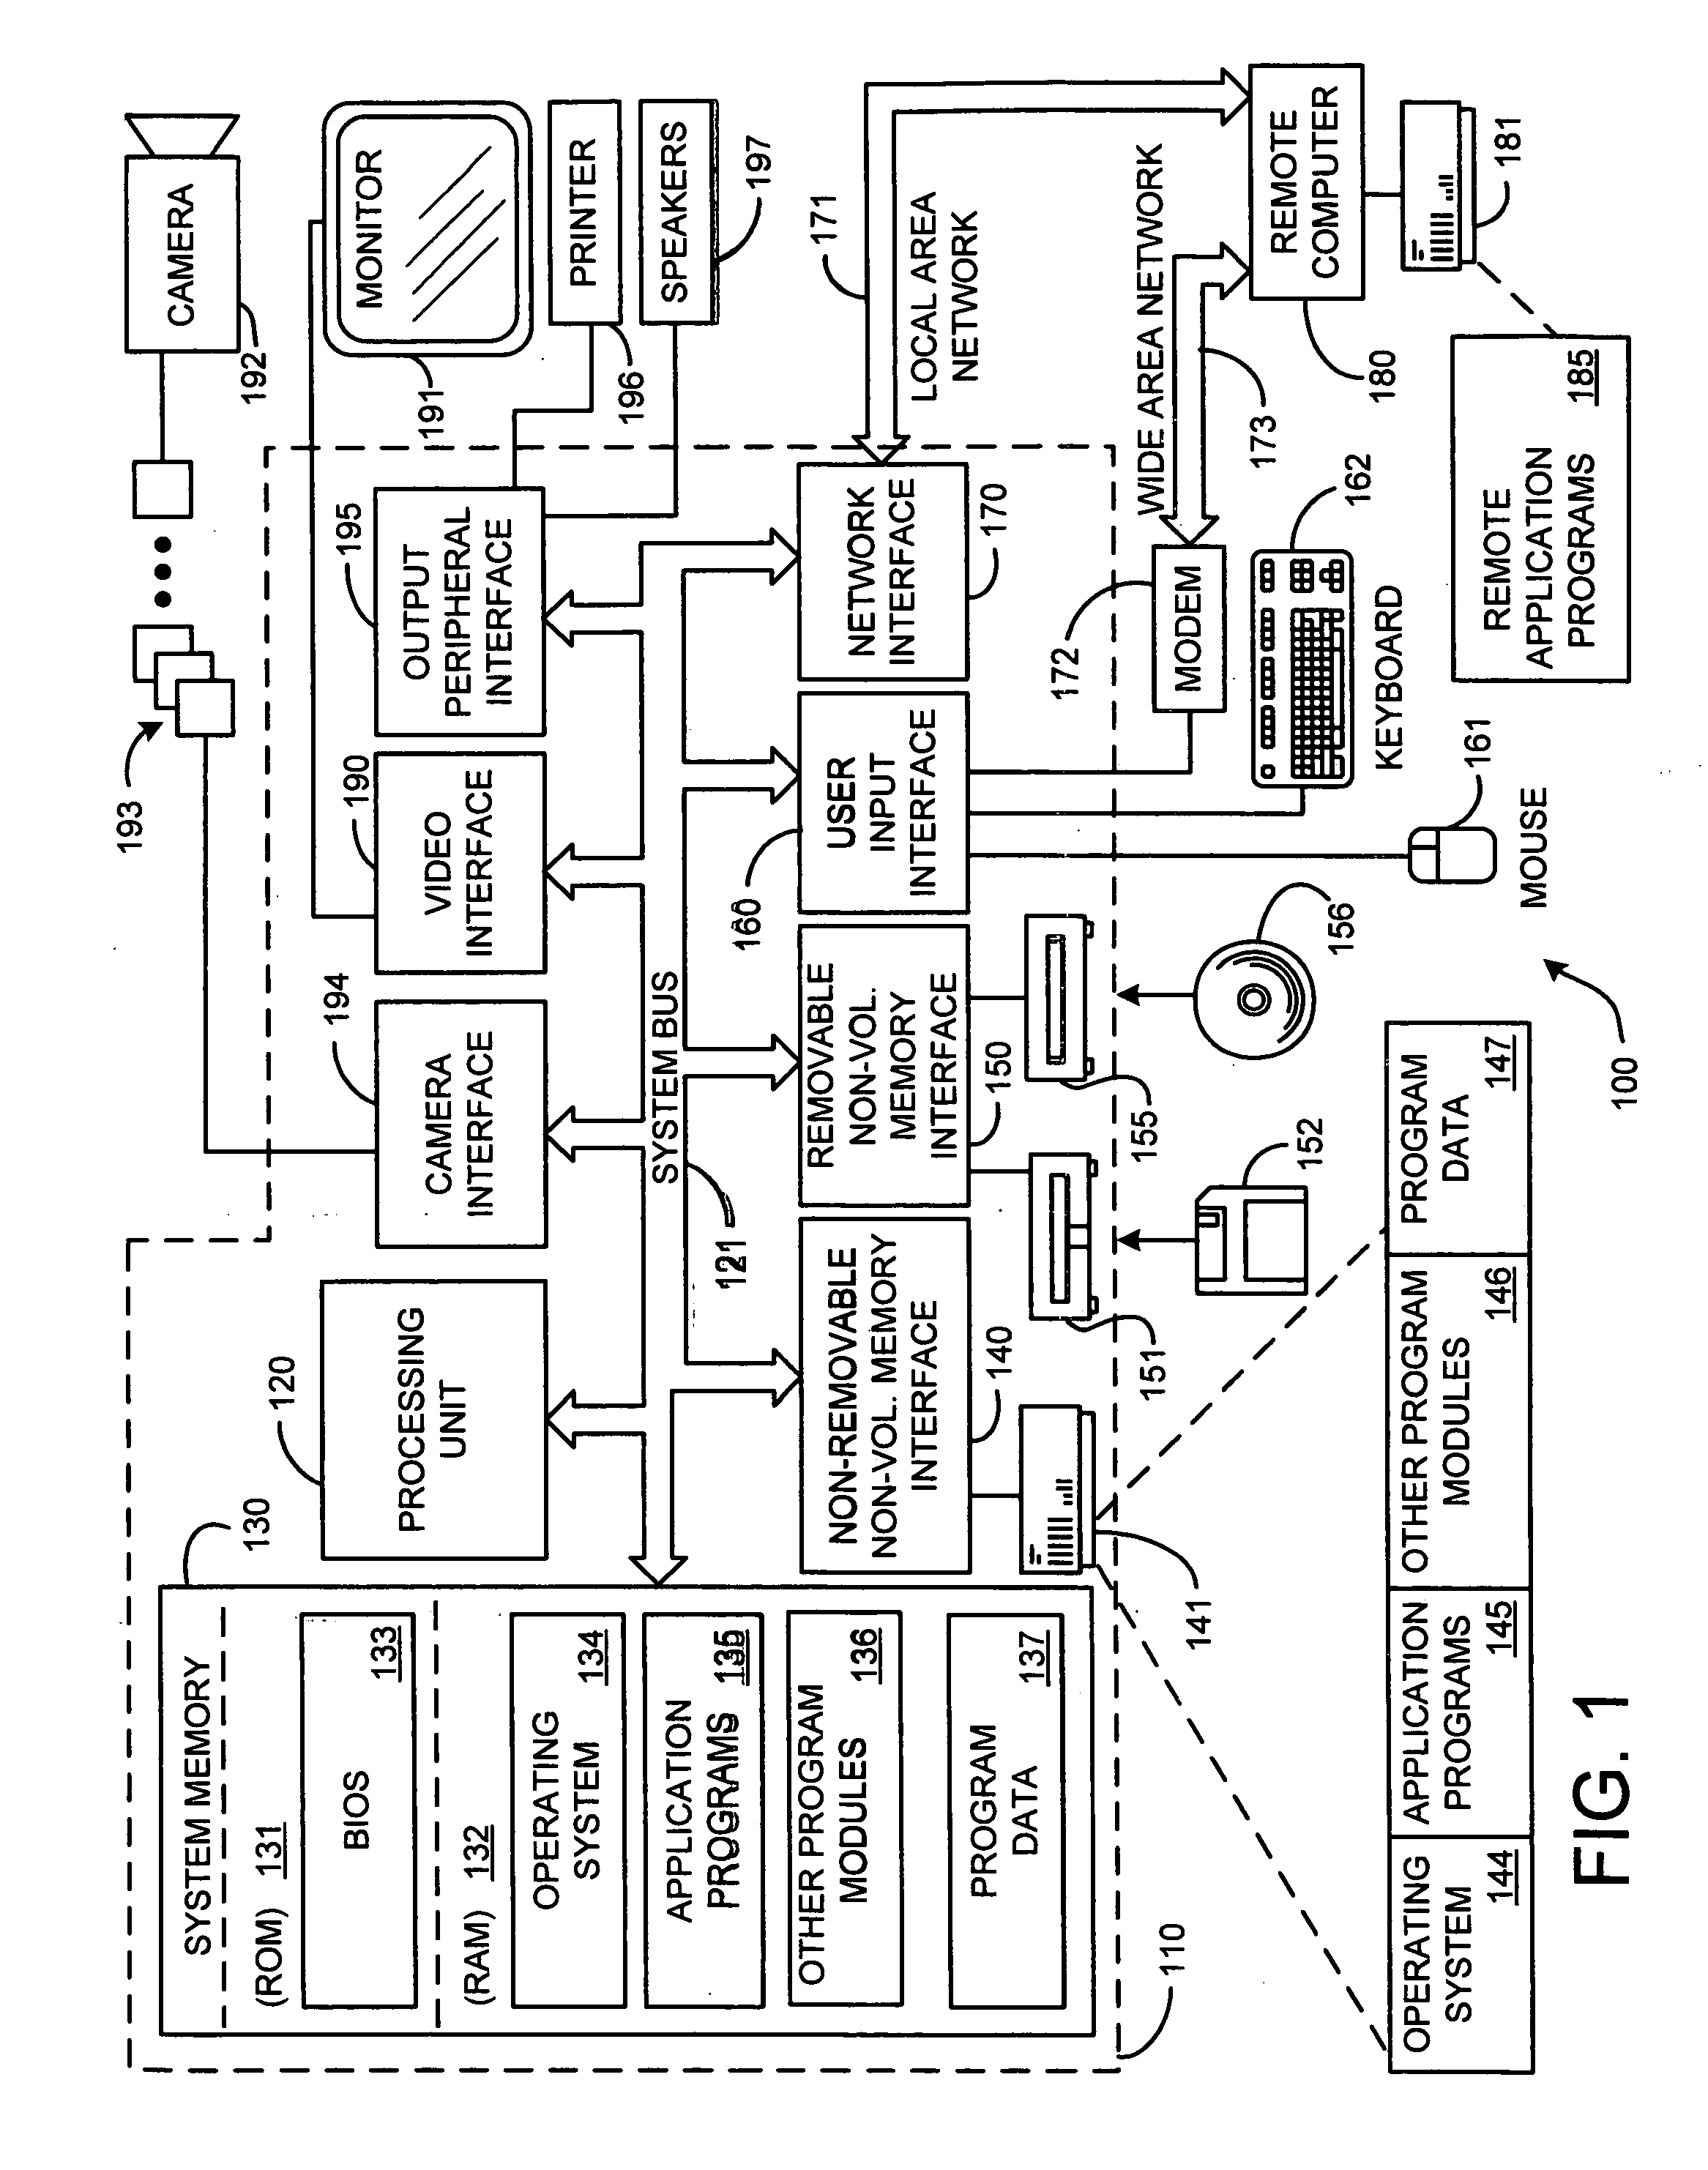 Real-time rendering system and process for interactive viewpoint video